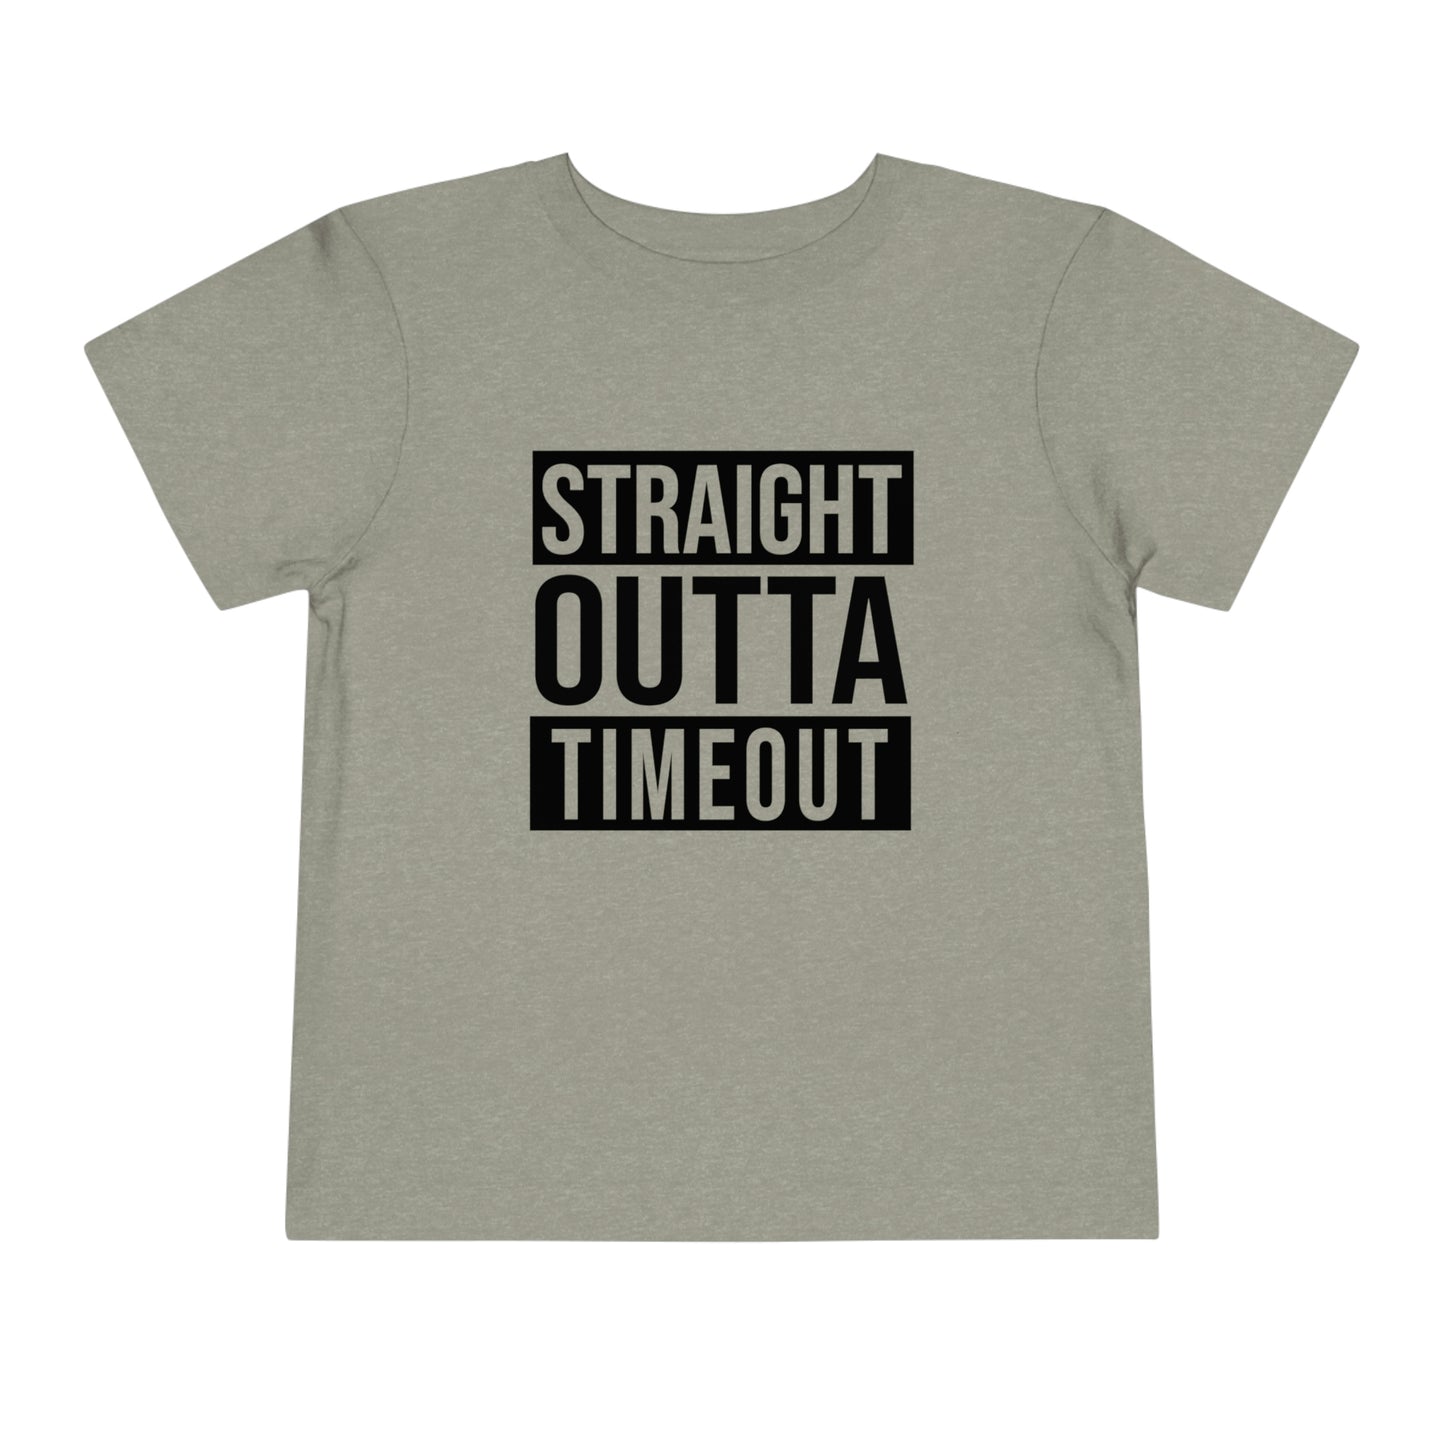 "Straight Outta Timeout" Toddler Short Sleeve Tee (2T-5T)